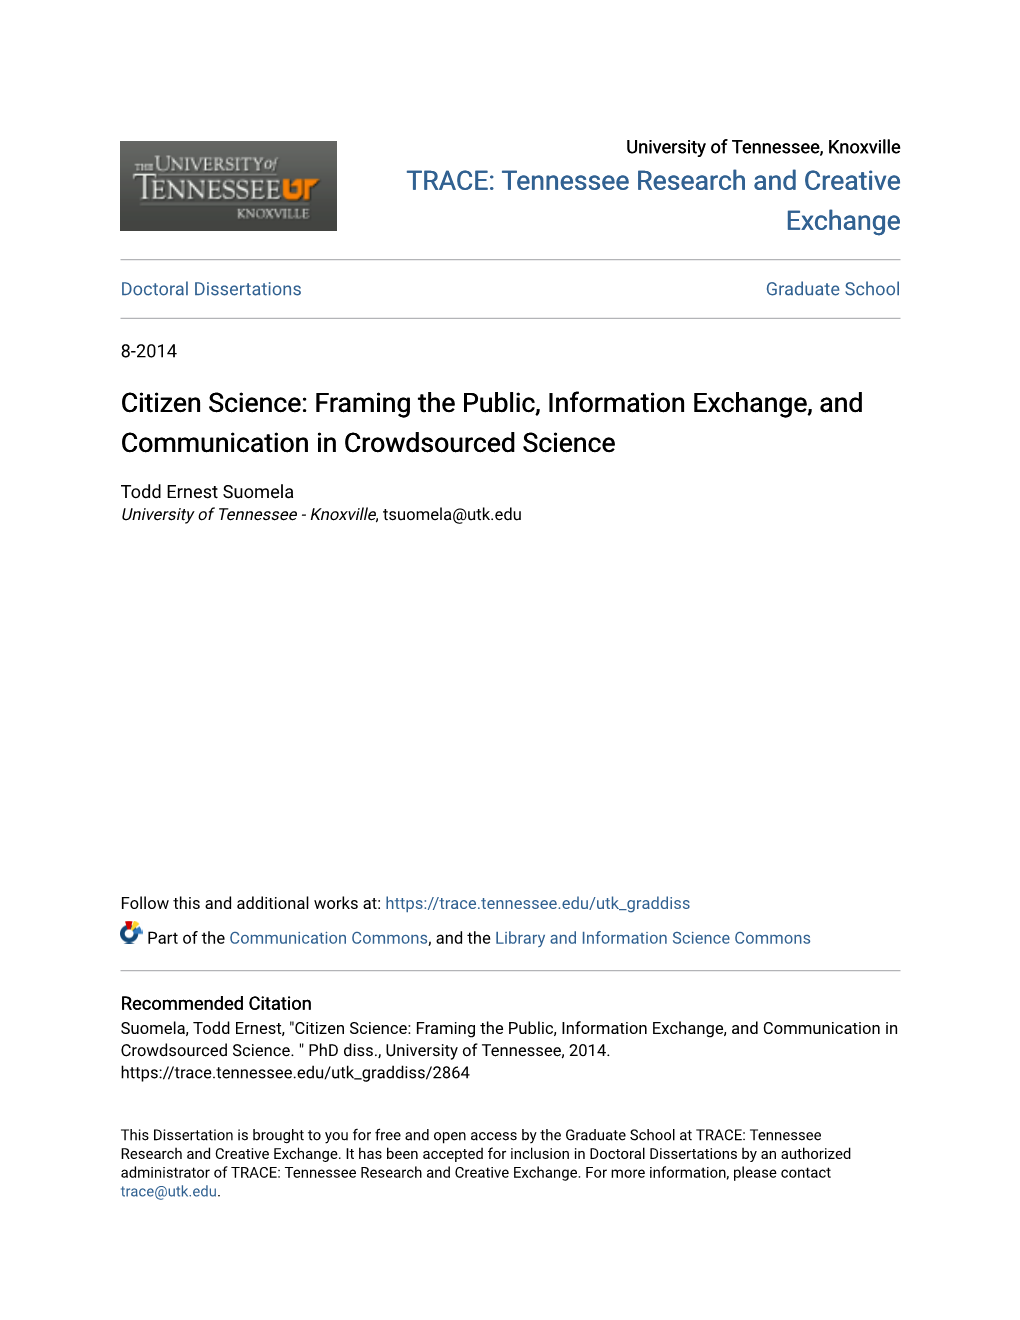 Citizen Science: Framing the Public, Information Exchange, and Communication in Crowdsourced Science